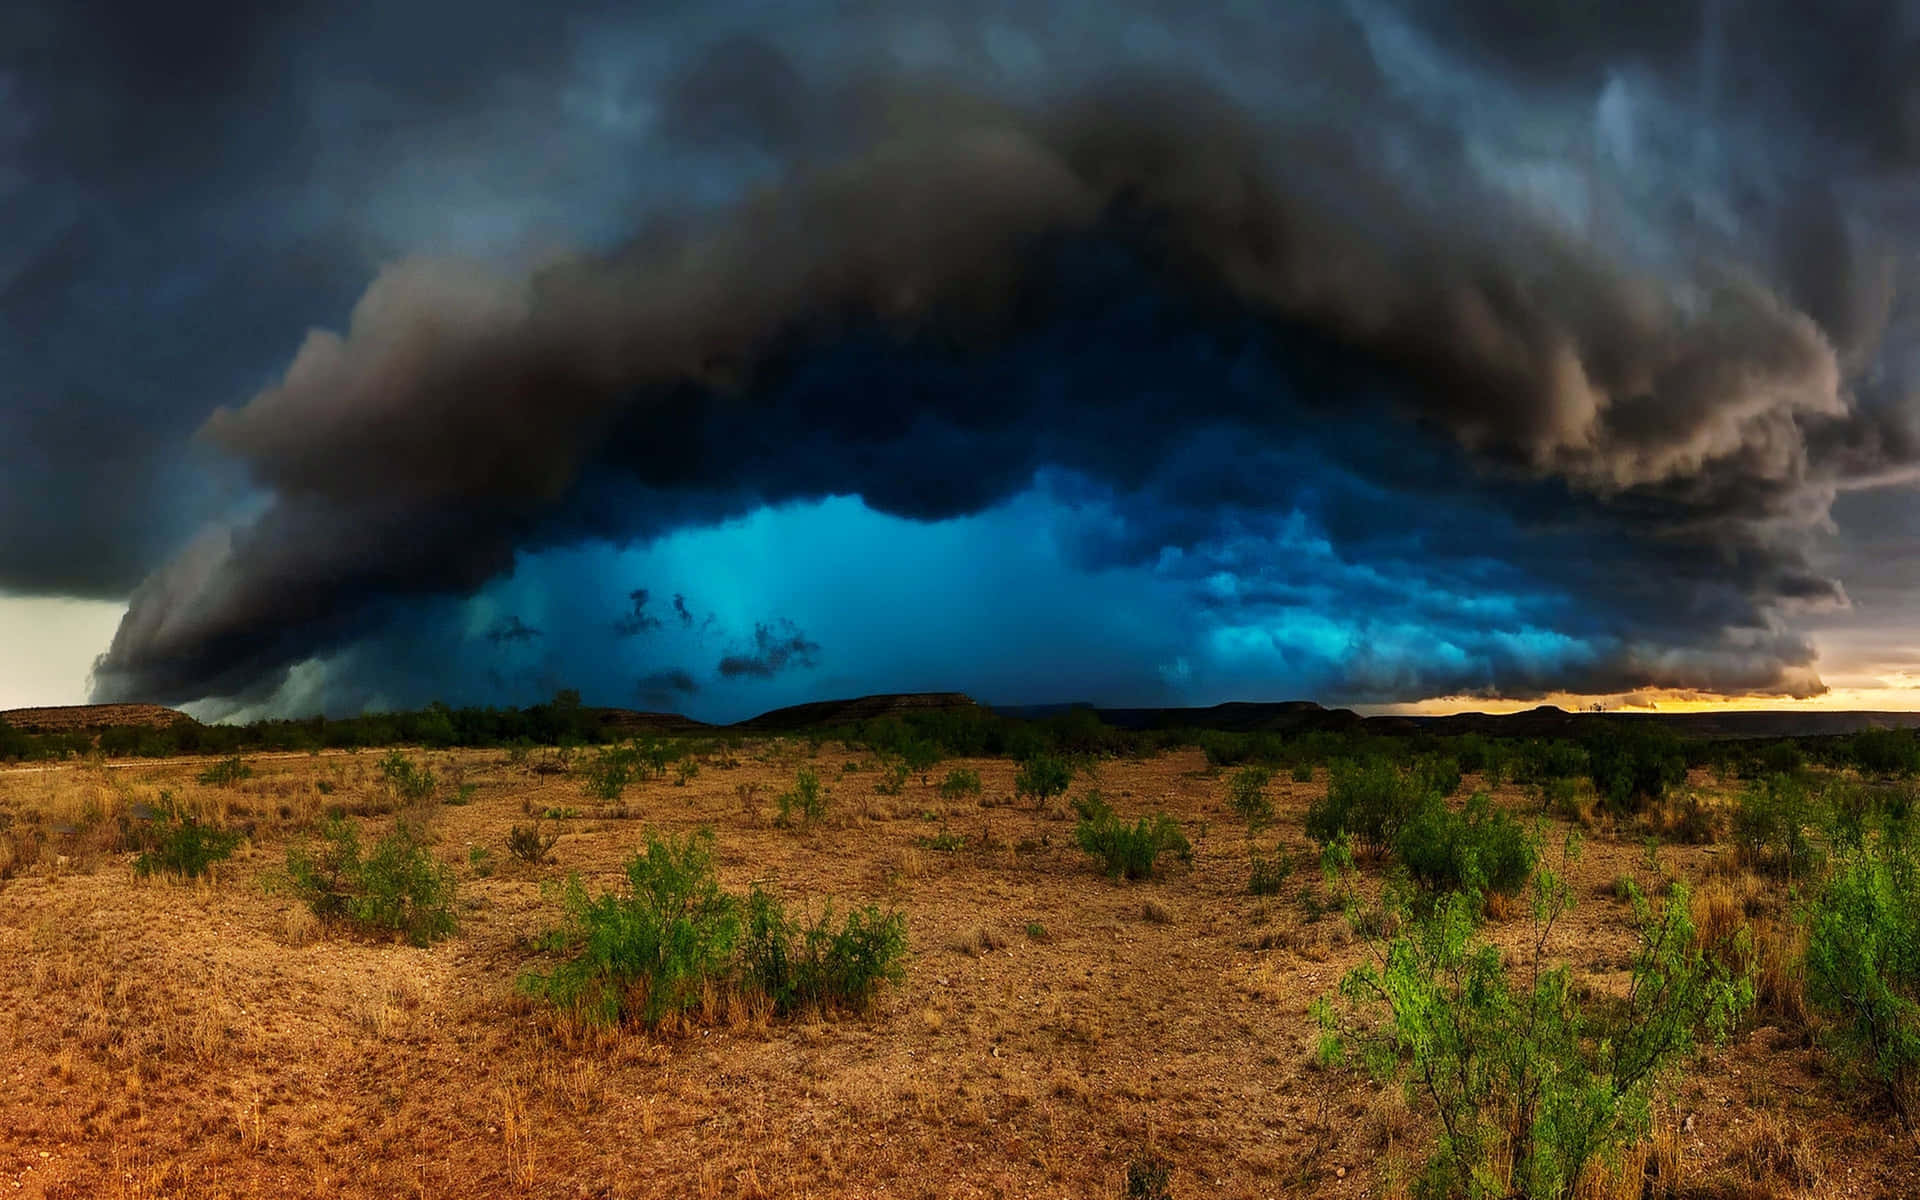 A Large Storm Cloud Is Seen Over The Desert